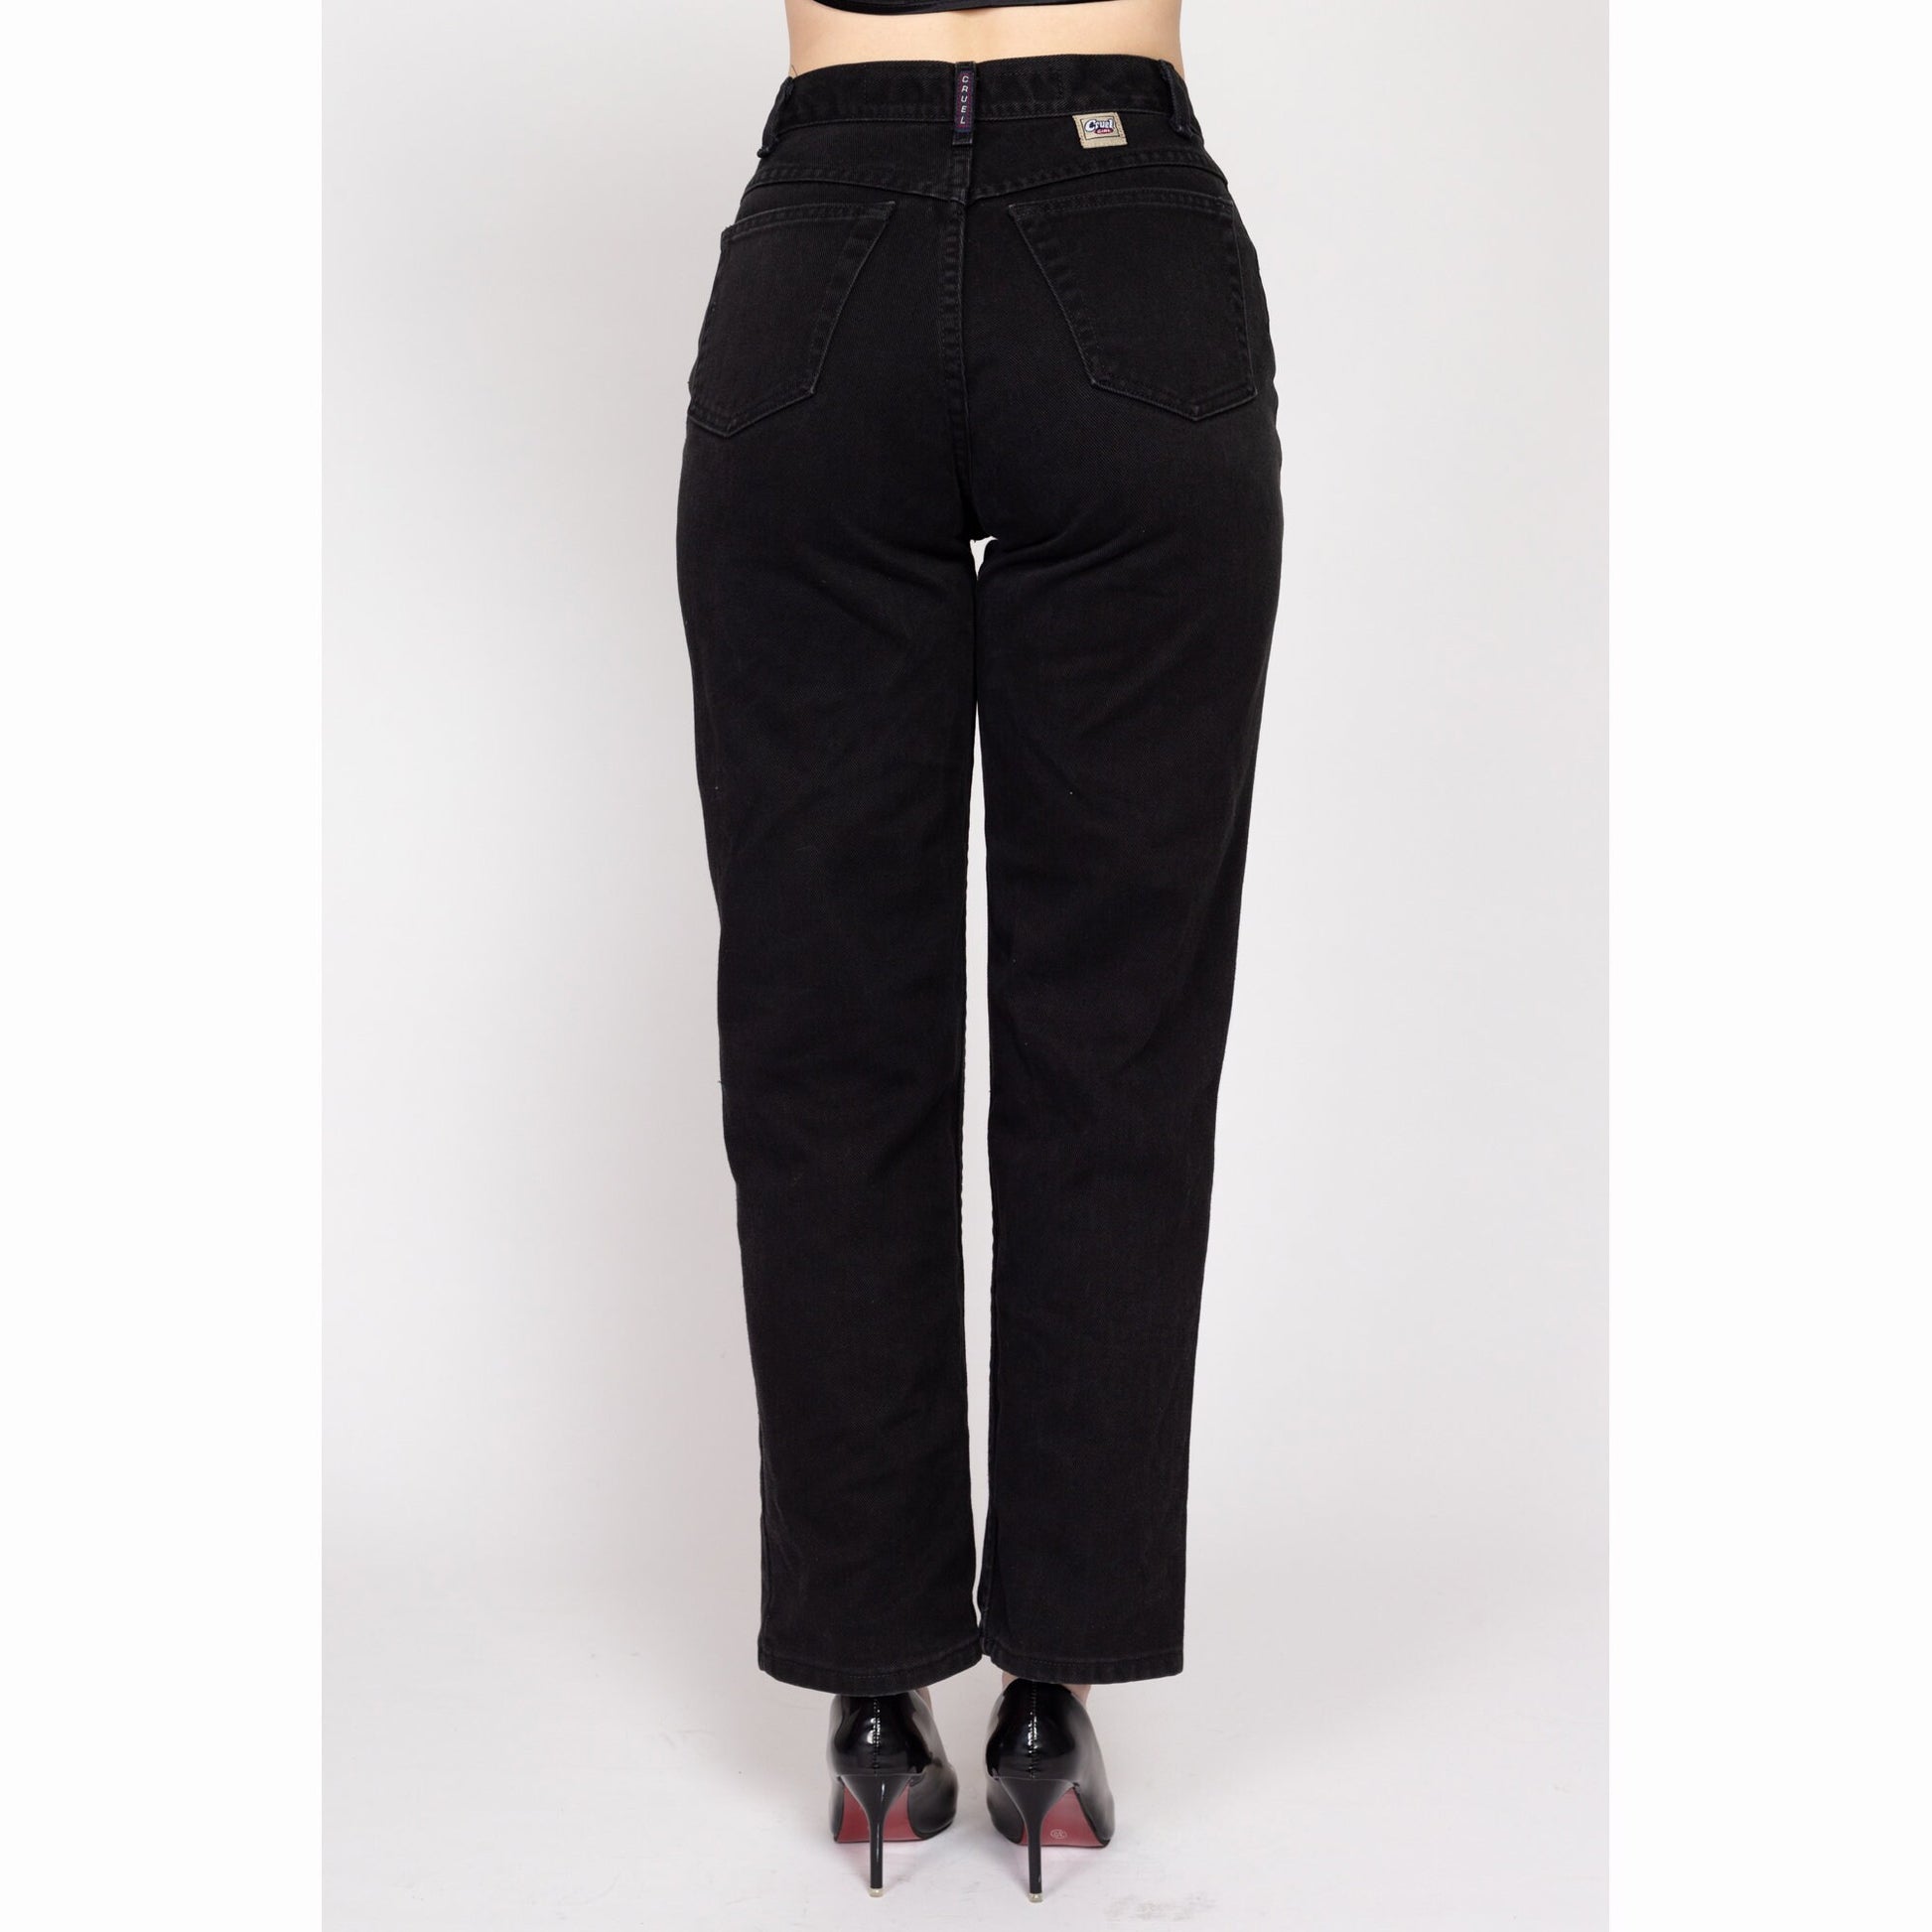 Small 90s Black High Waisted Relaxed Mom Jeans 27" | Vintage Cotton Denim Straight Leg Jeans